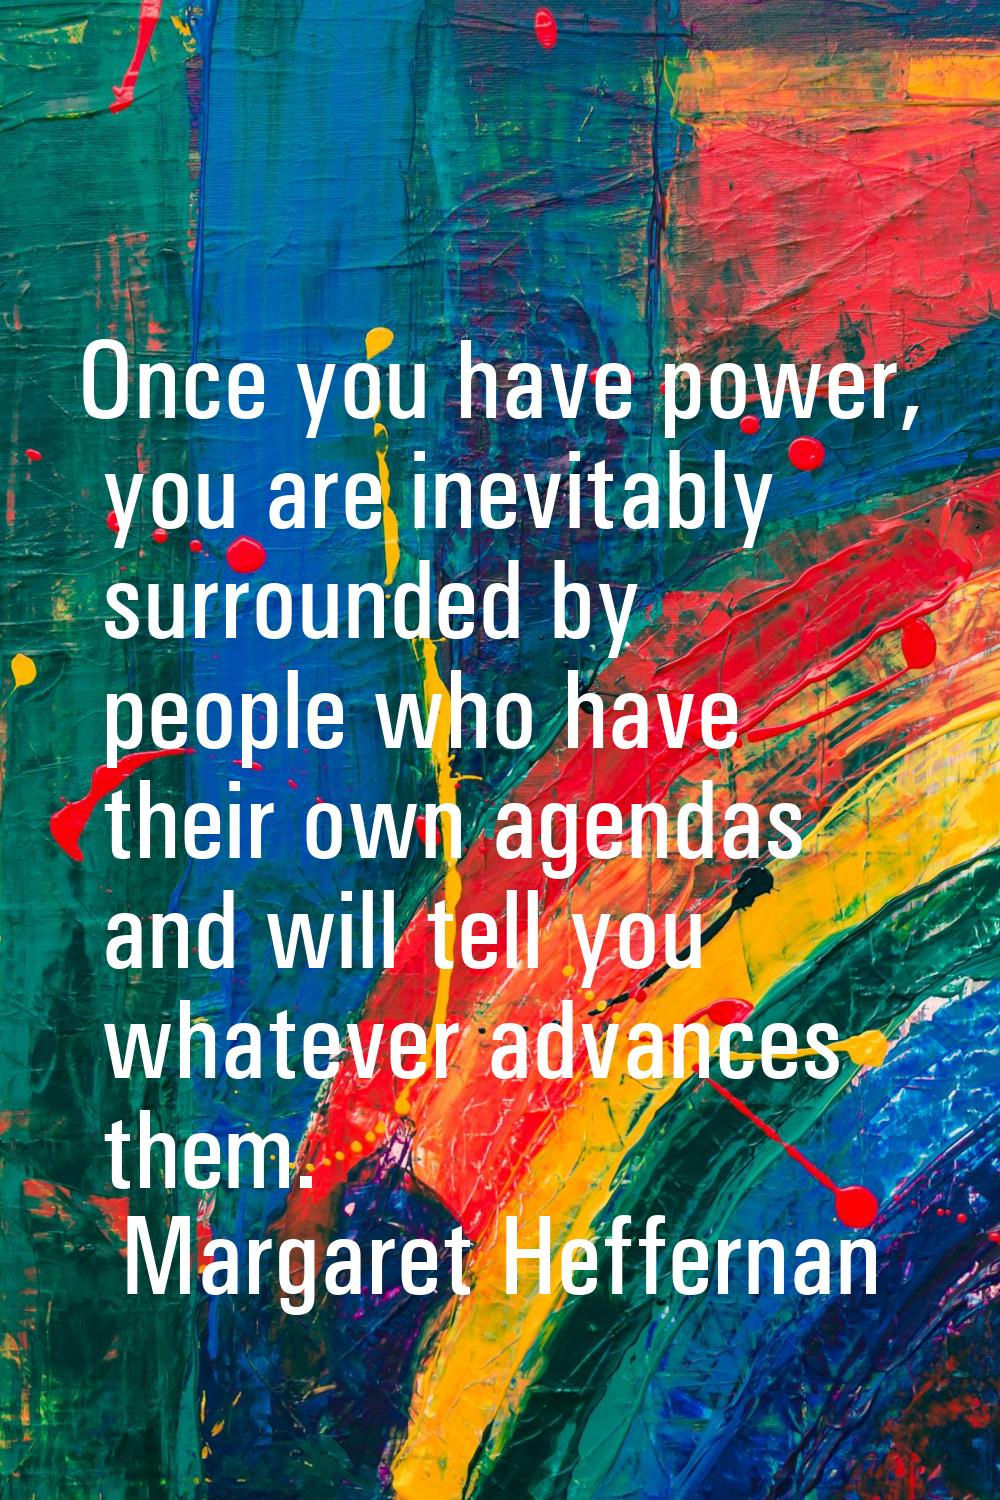 Once you have power, you are inevitably surrounded by people who have their own agendas and will te